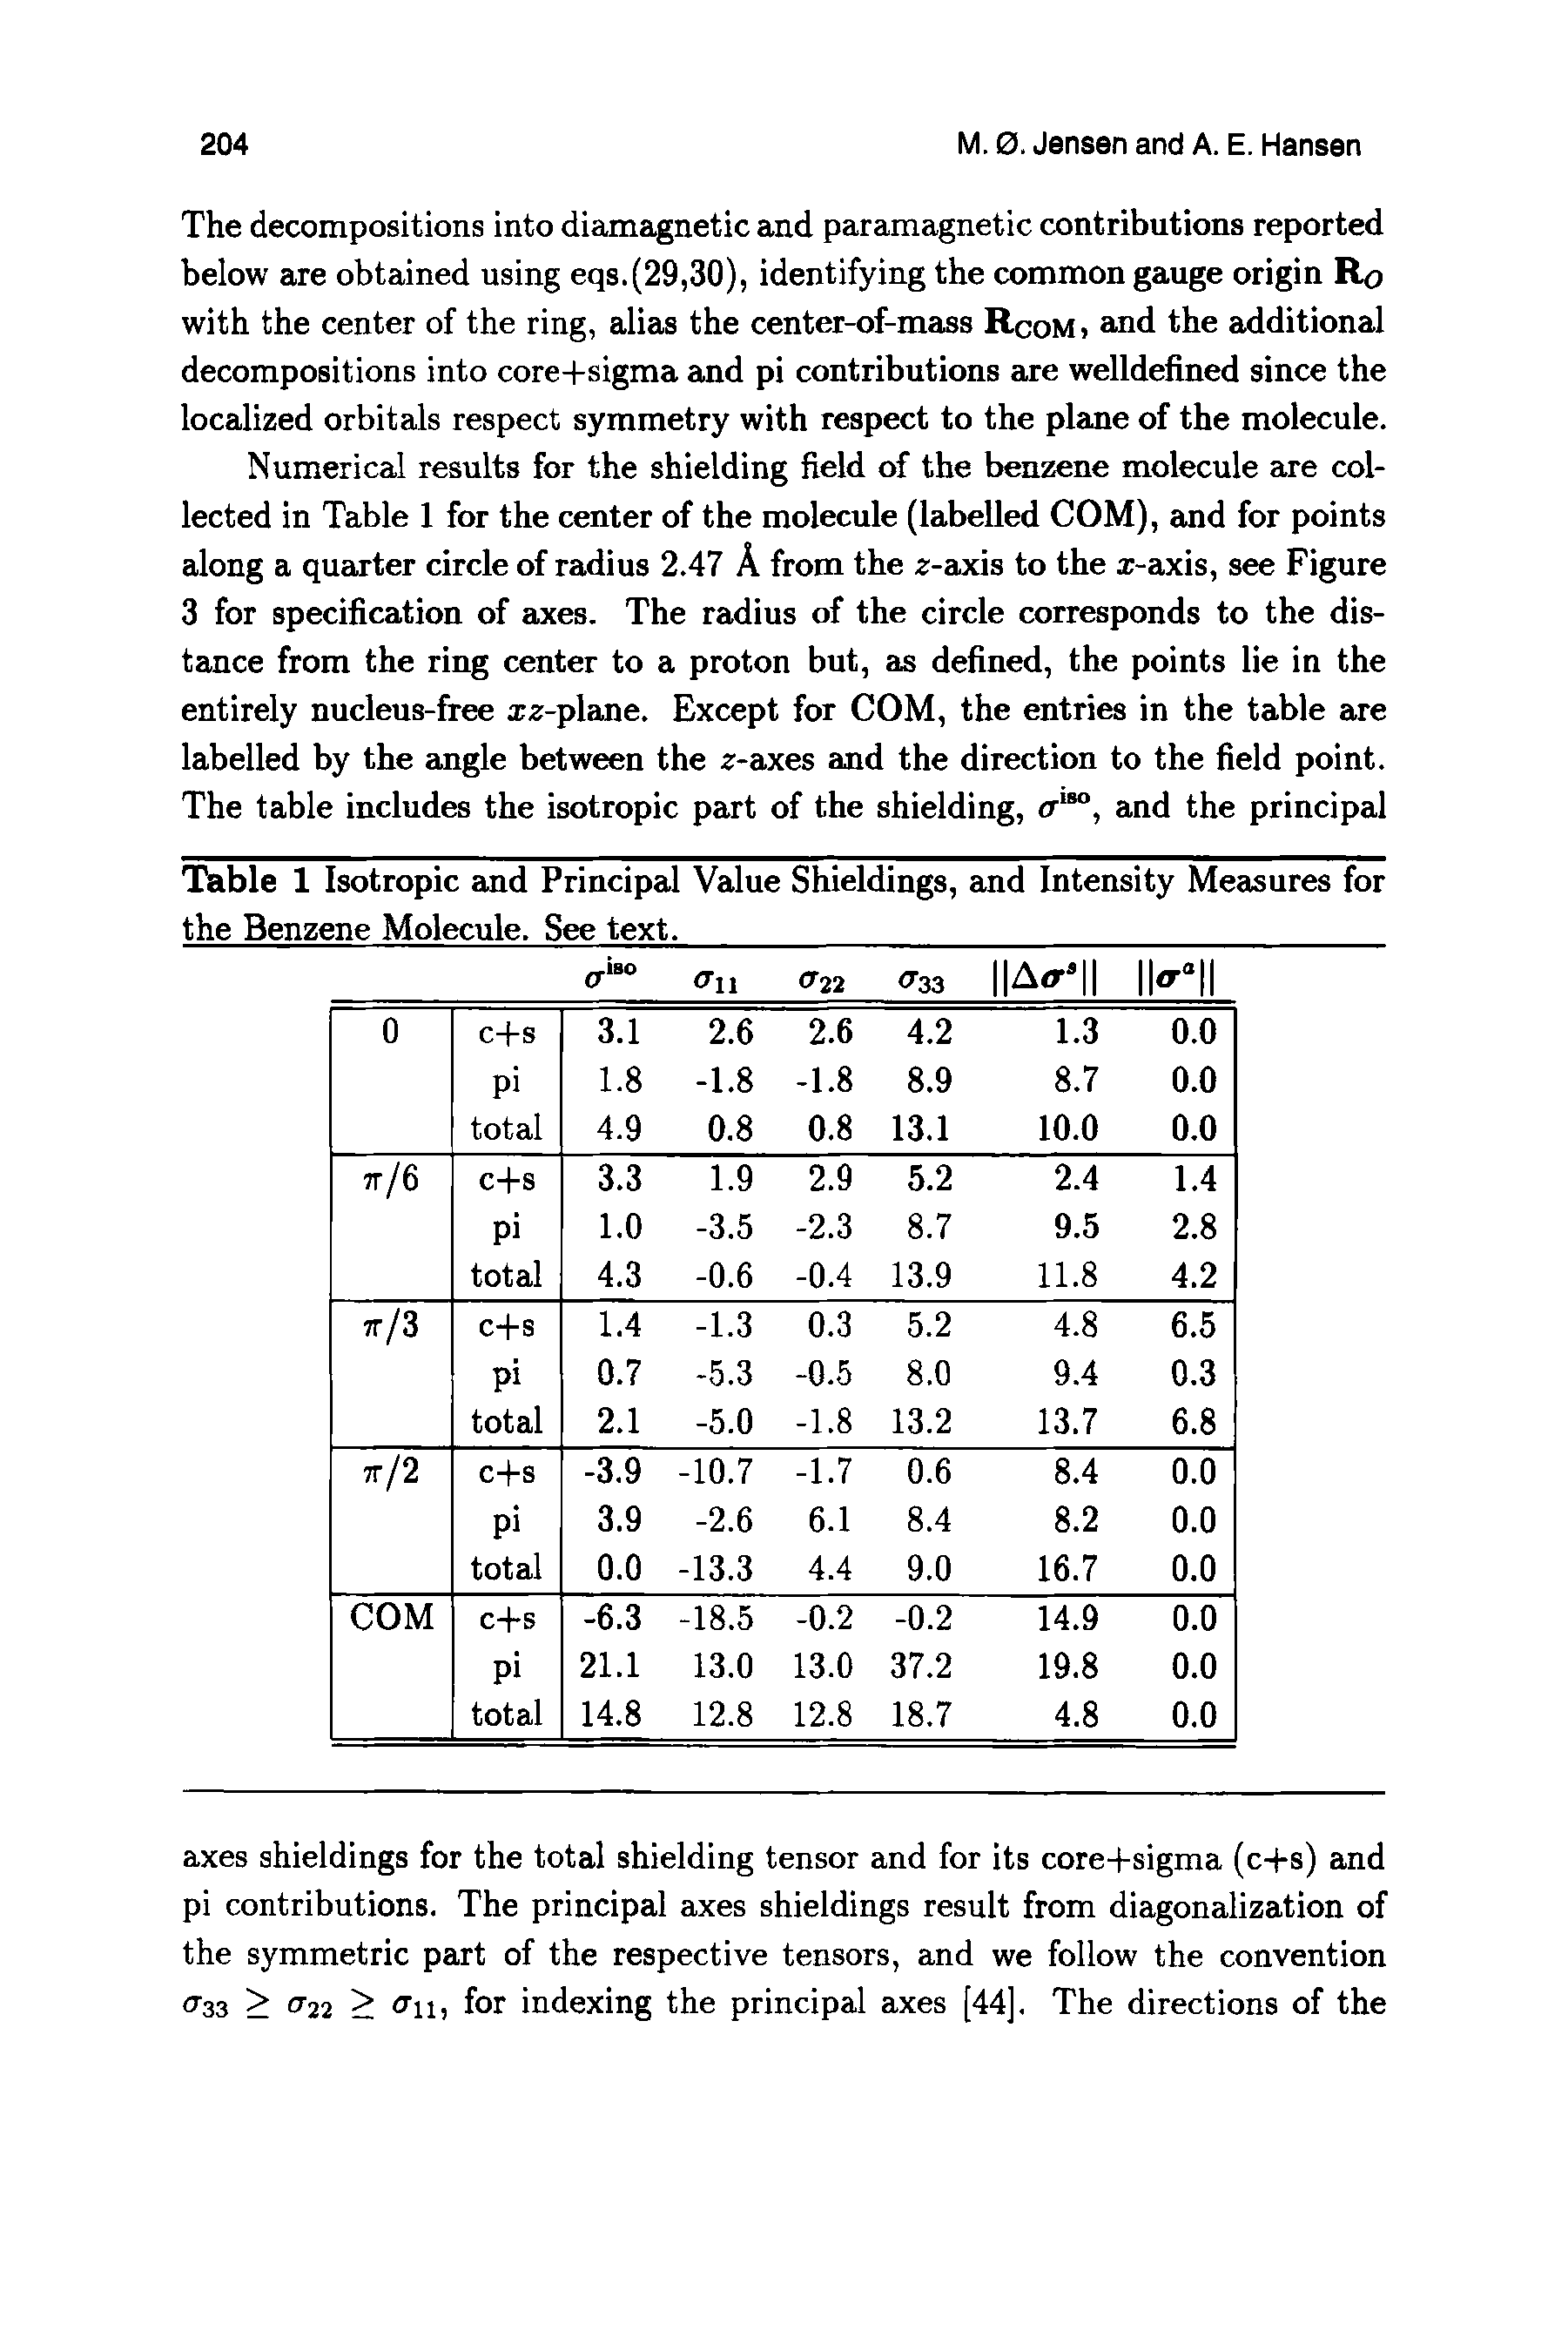 Table 1 Isotropic and Principal Value Shieldings, and Intensity Measures for the Benzene Molecule. See text.